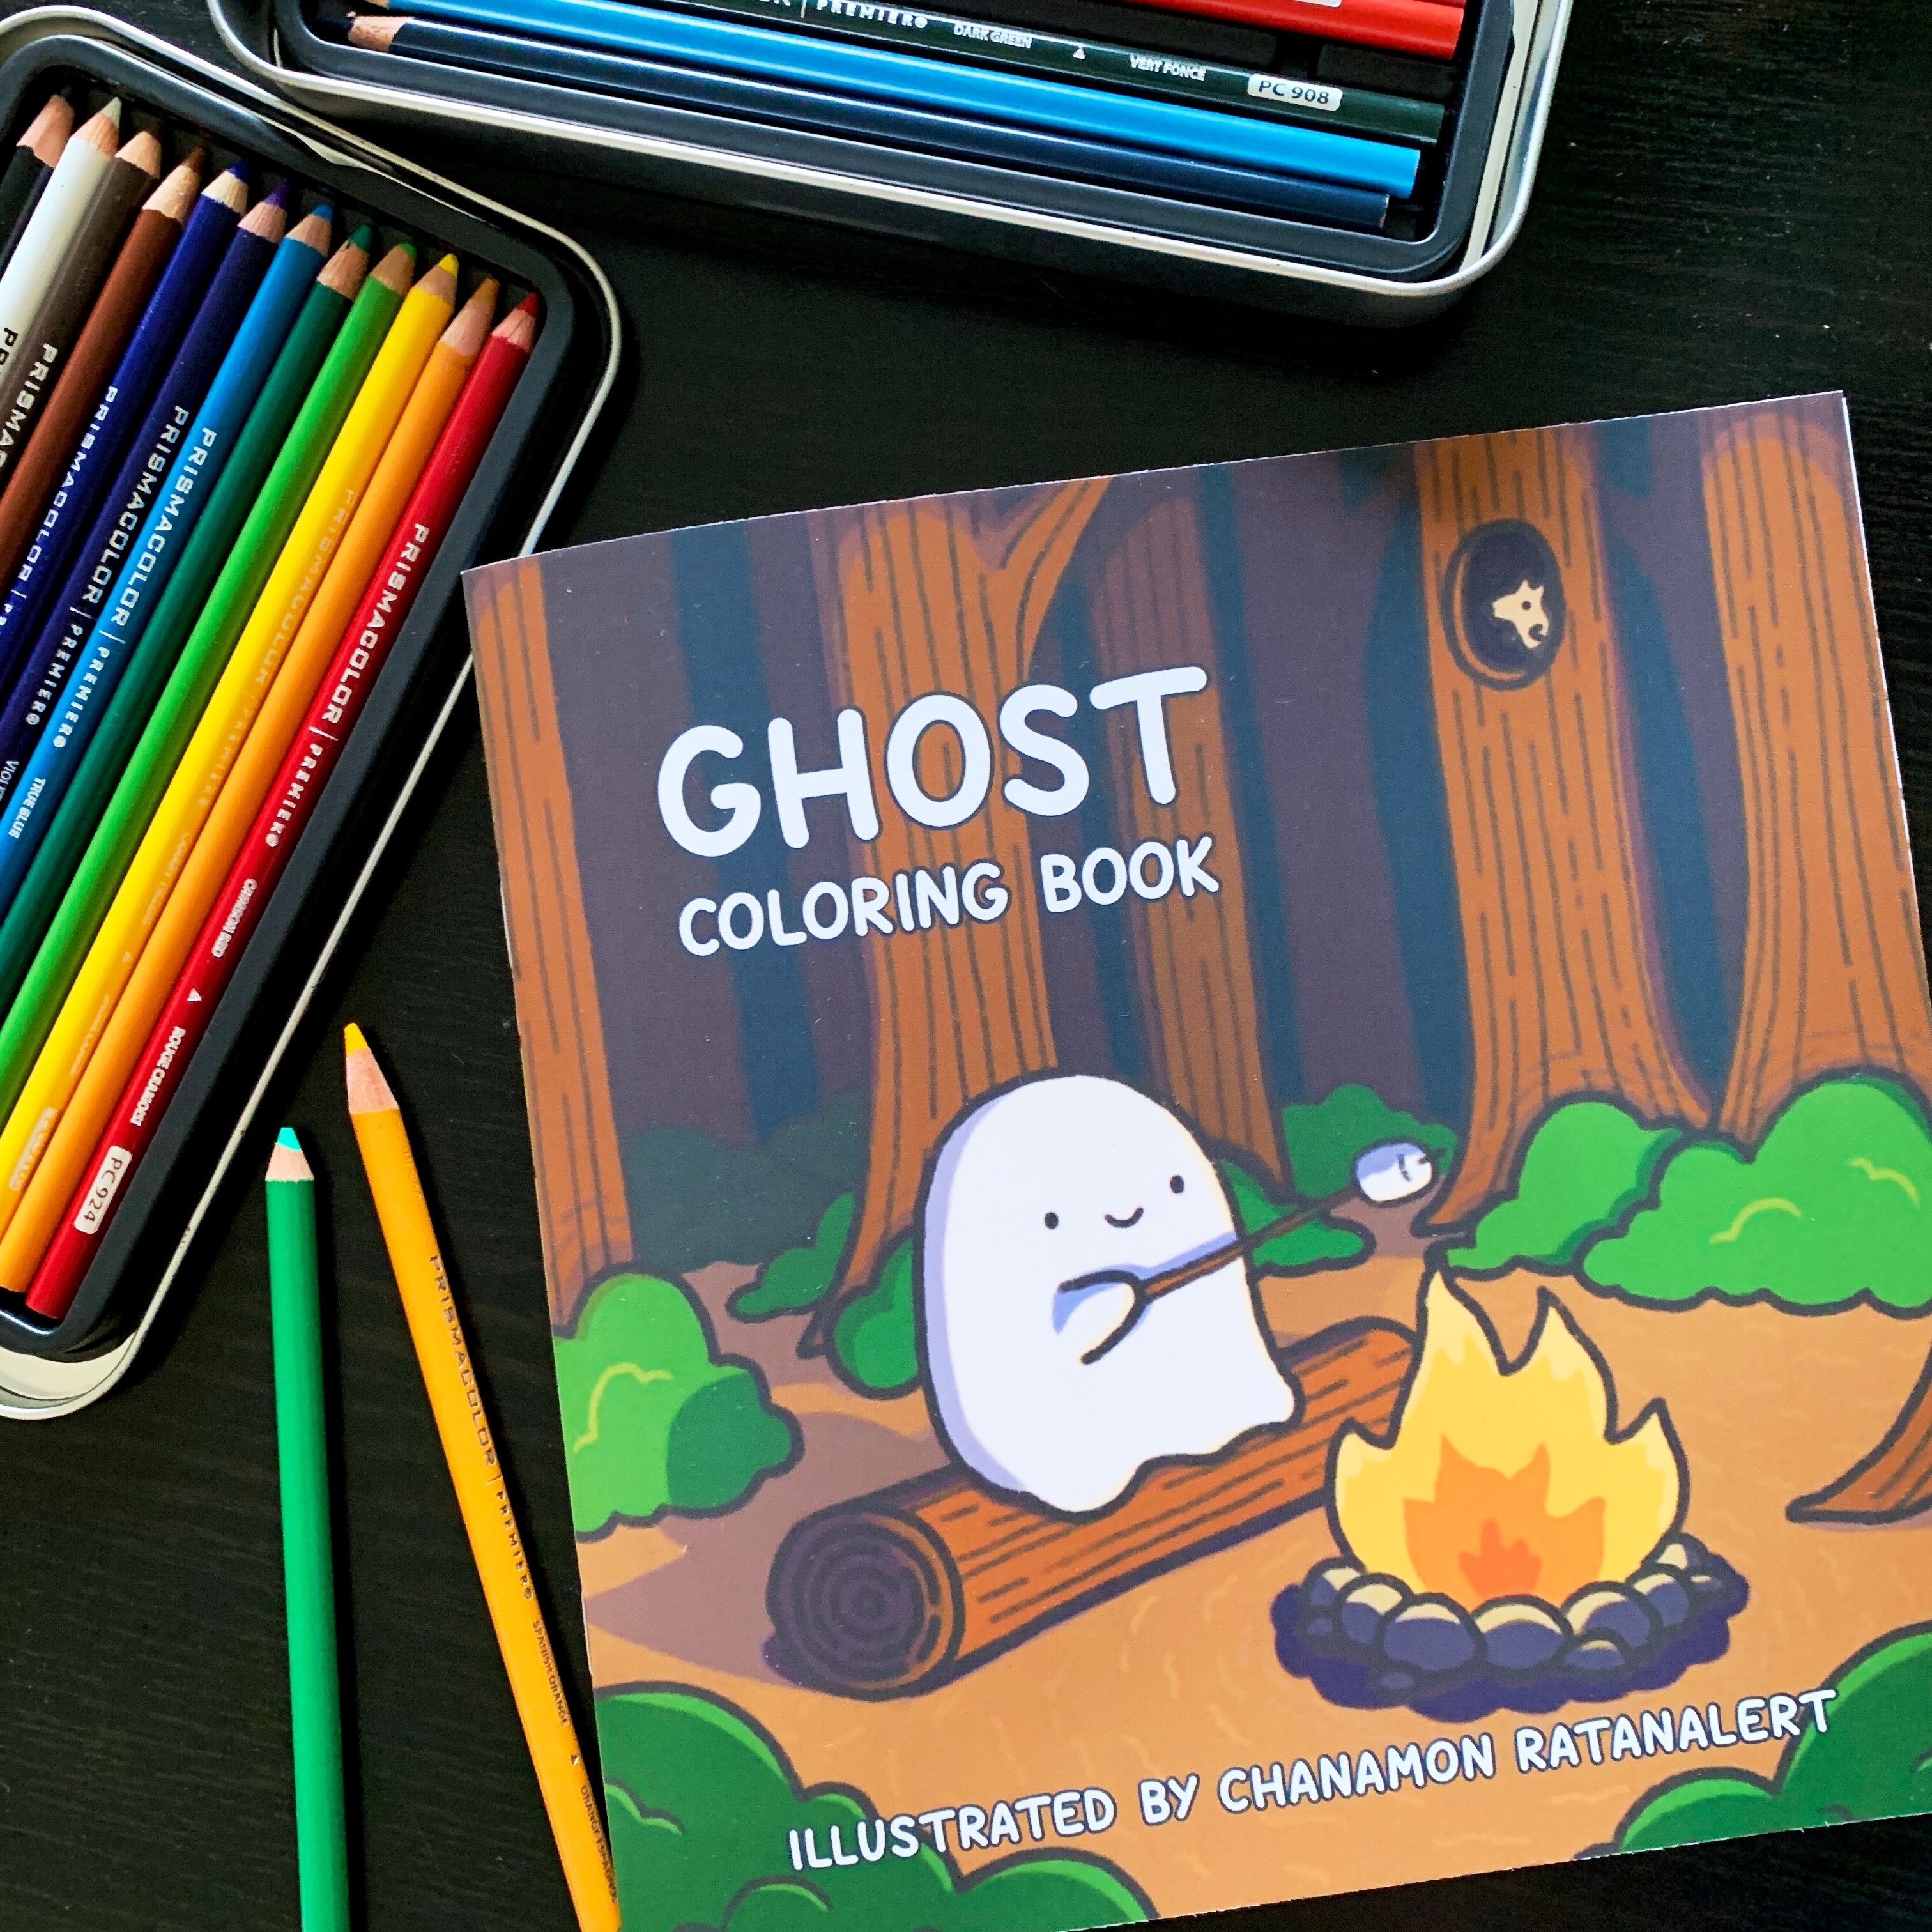 Ghost Coloring Book – Made by Chanamon